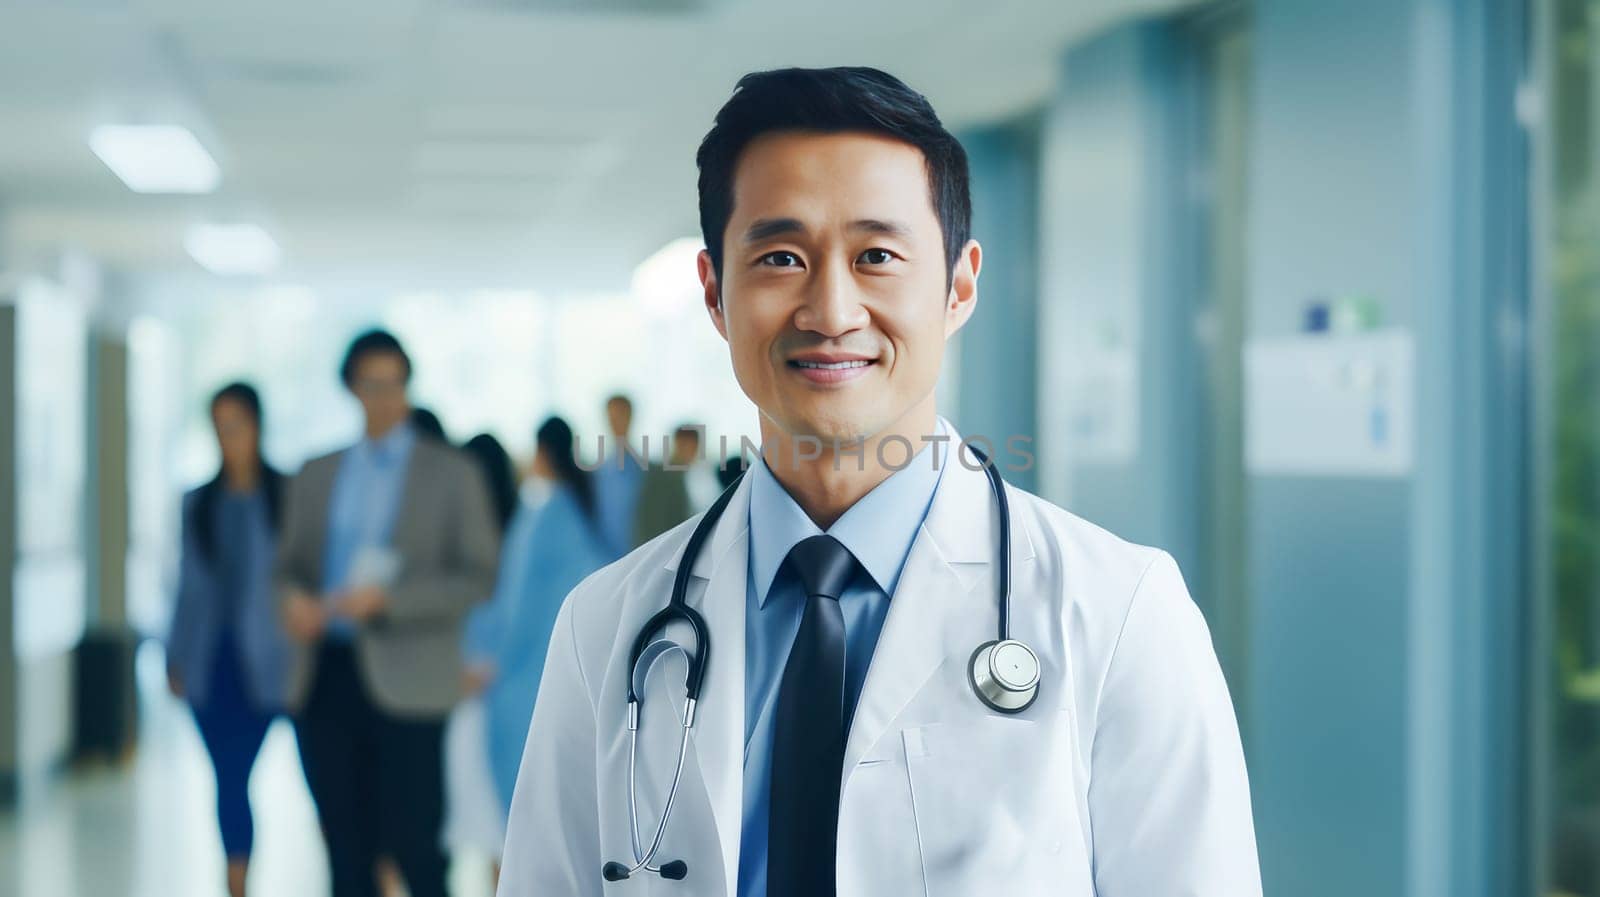 Portrait of a smiling Asian Korean doctor man with a stethoscope in a medical hospital with modern equipment. by Alla_Yurtayeva